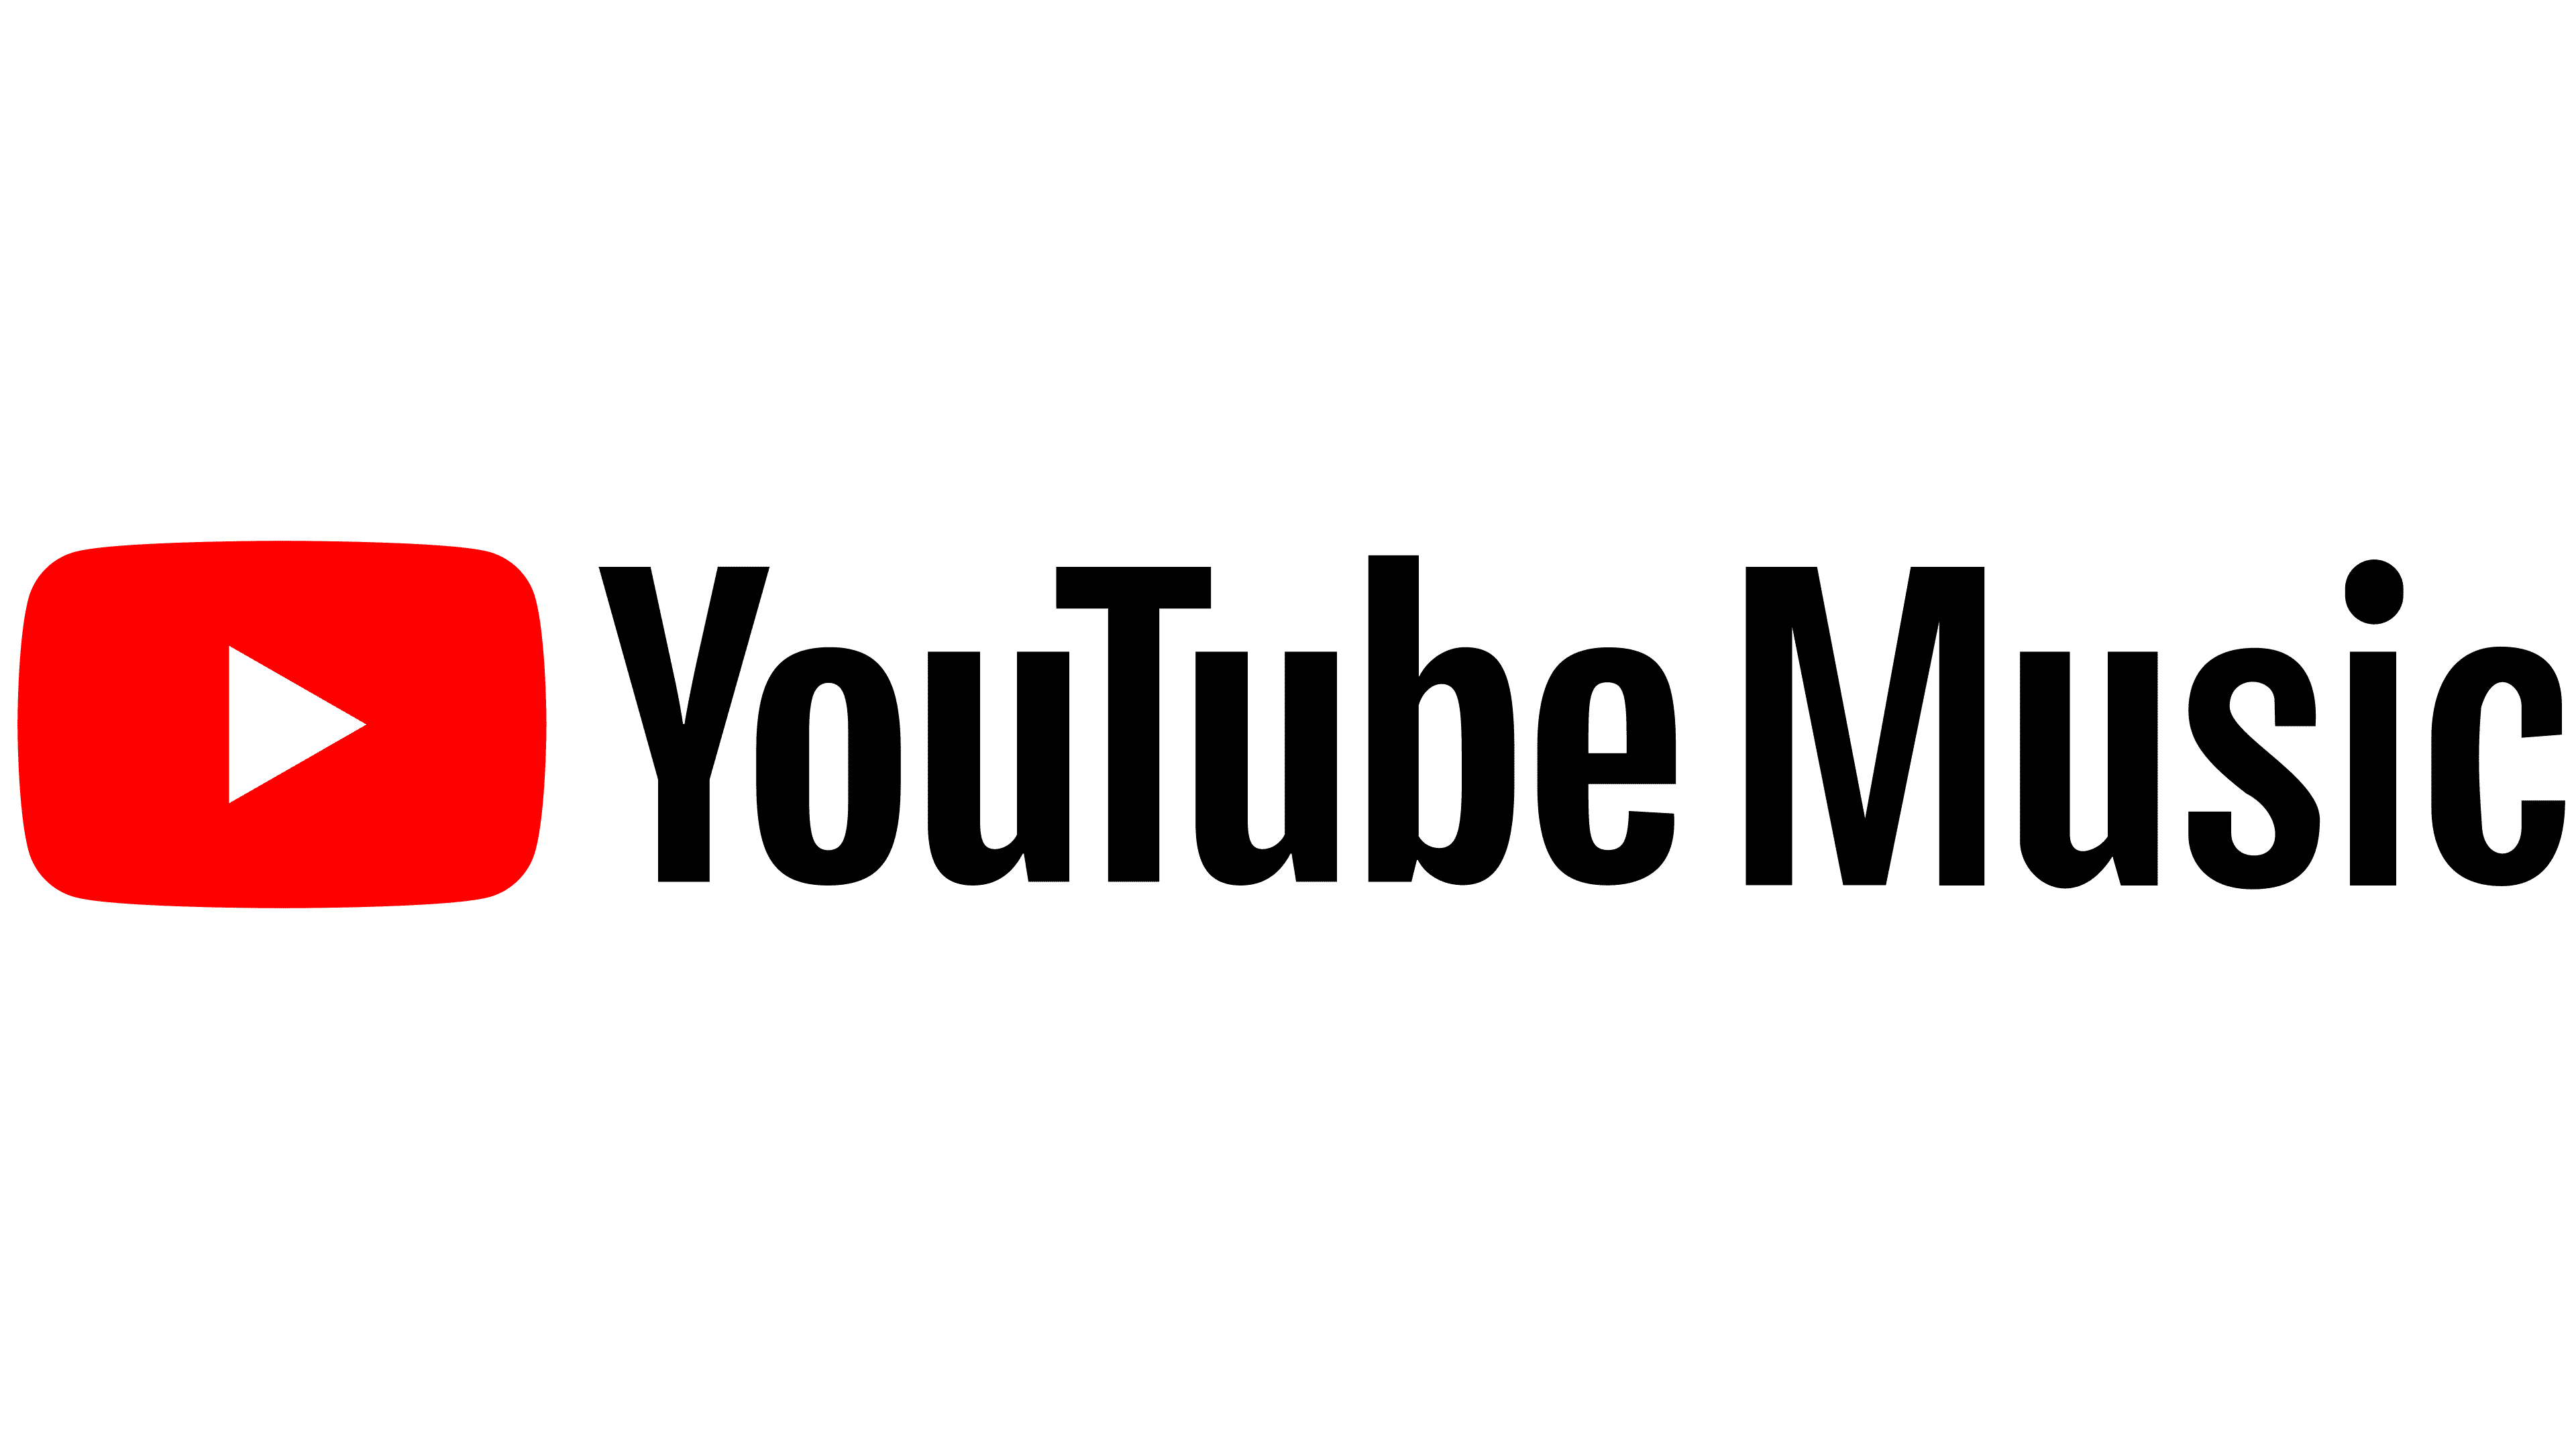 Com google android youtube music. Логотип ютуб. Иконка youtube Music. Логотип youtube Music PNG. Ютуб музыка логотип.